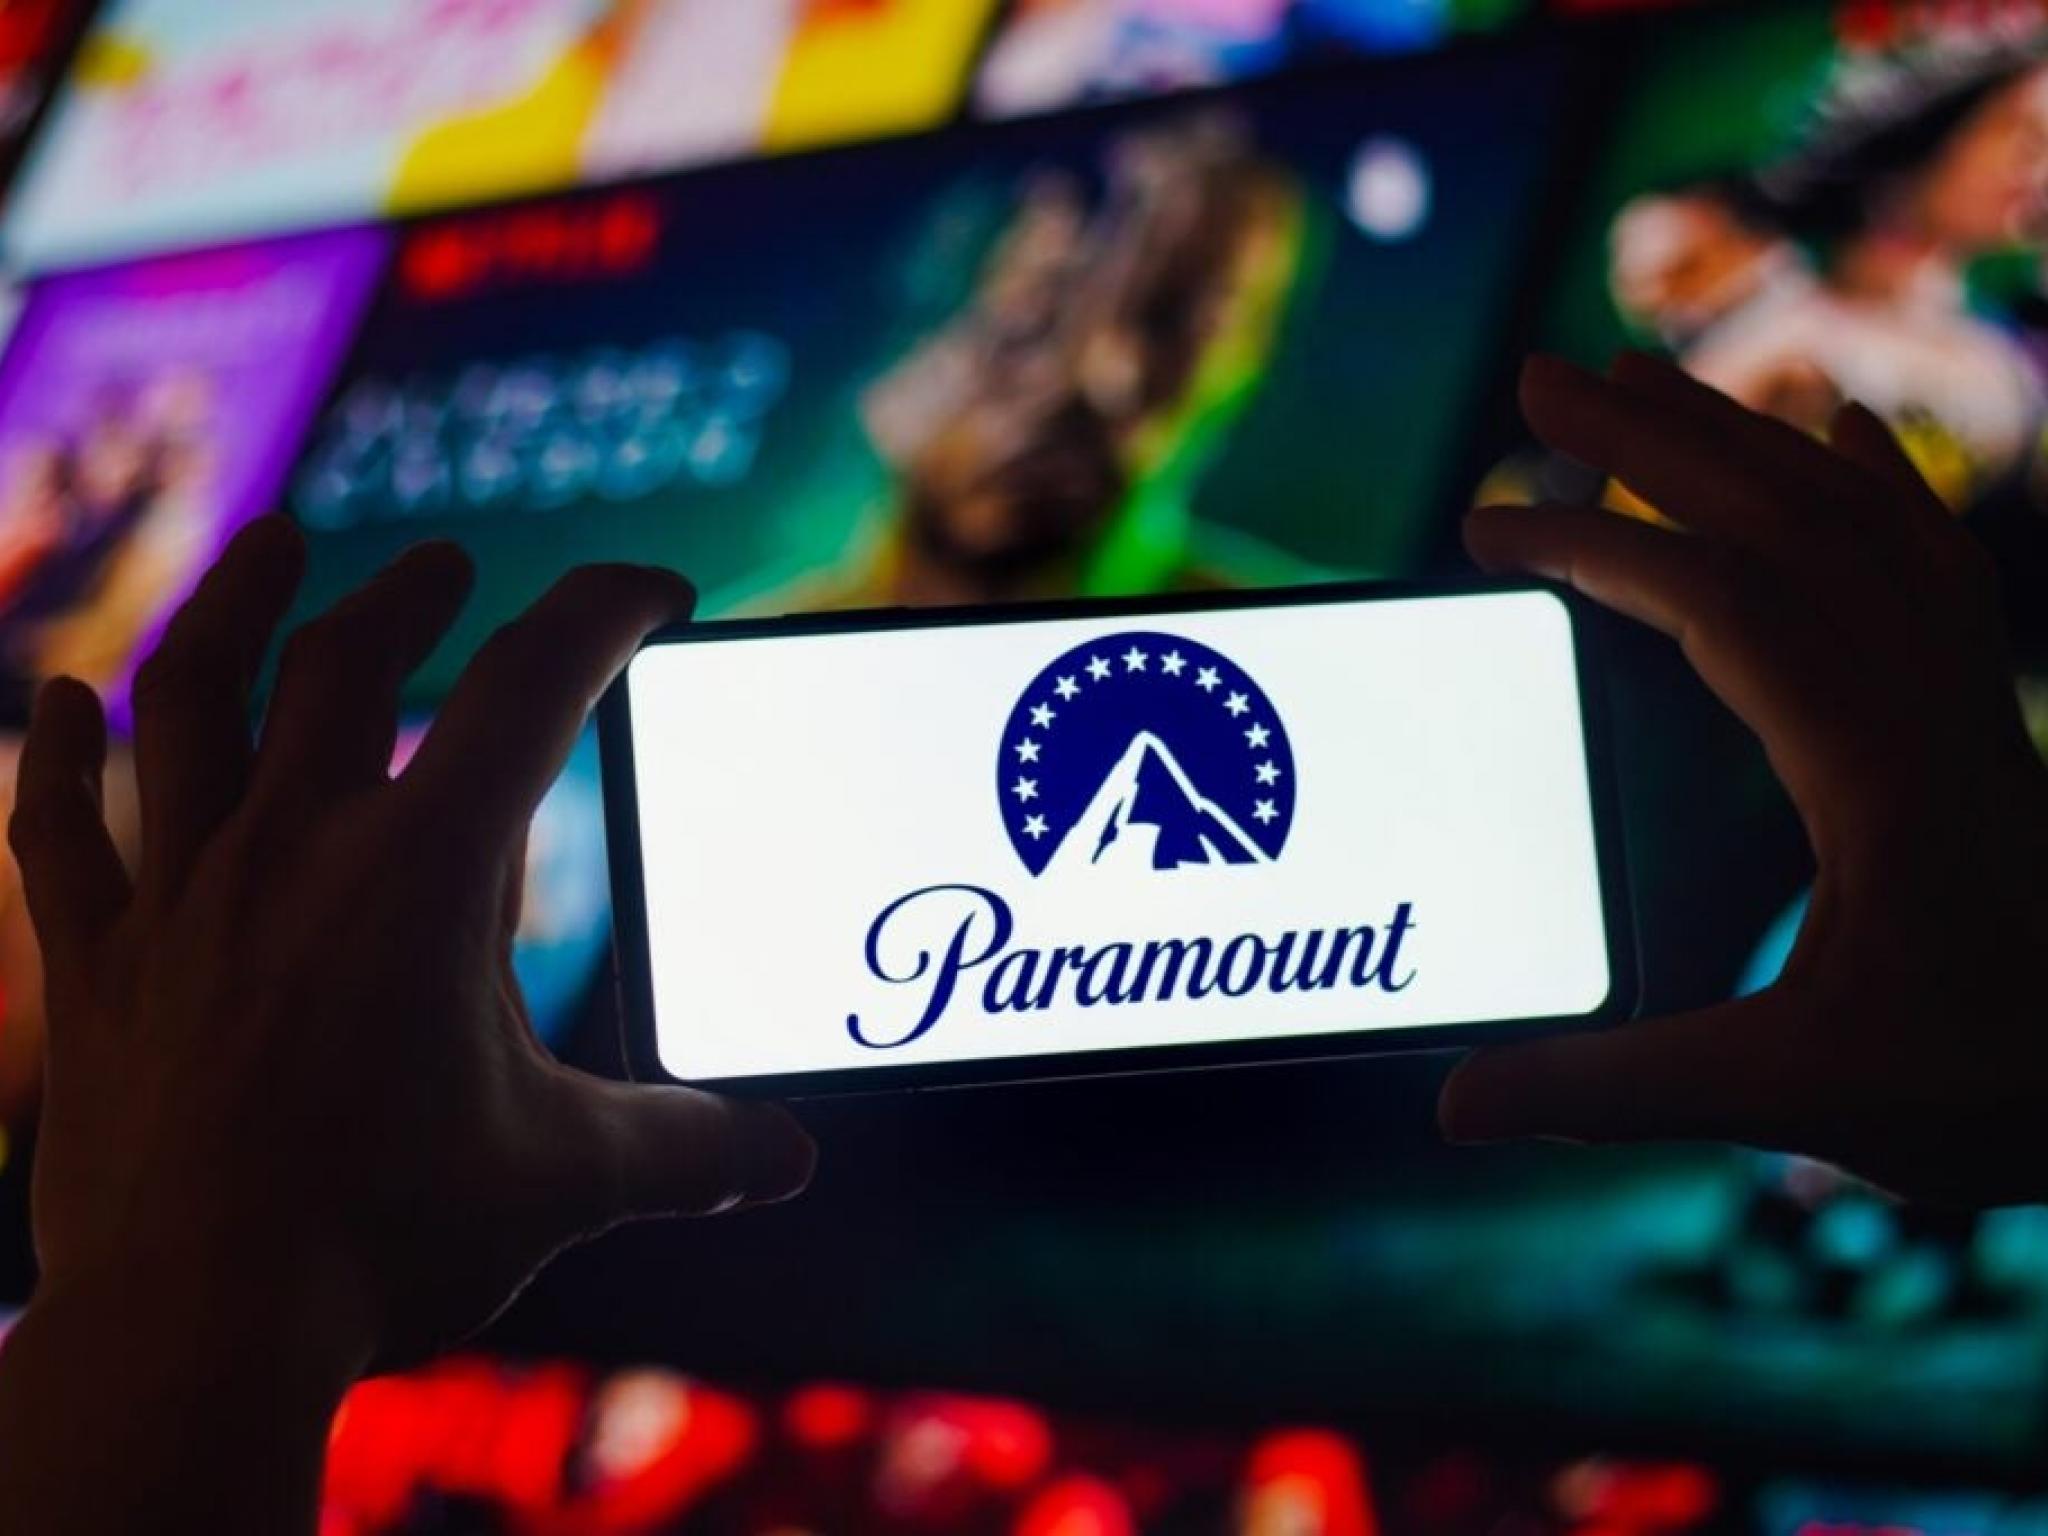  paramount-explores-partnership-expansion-with-amazon-report 